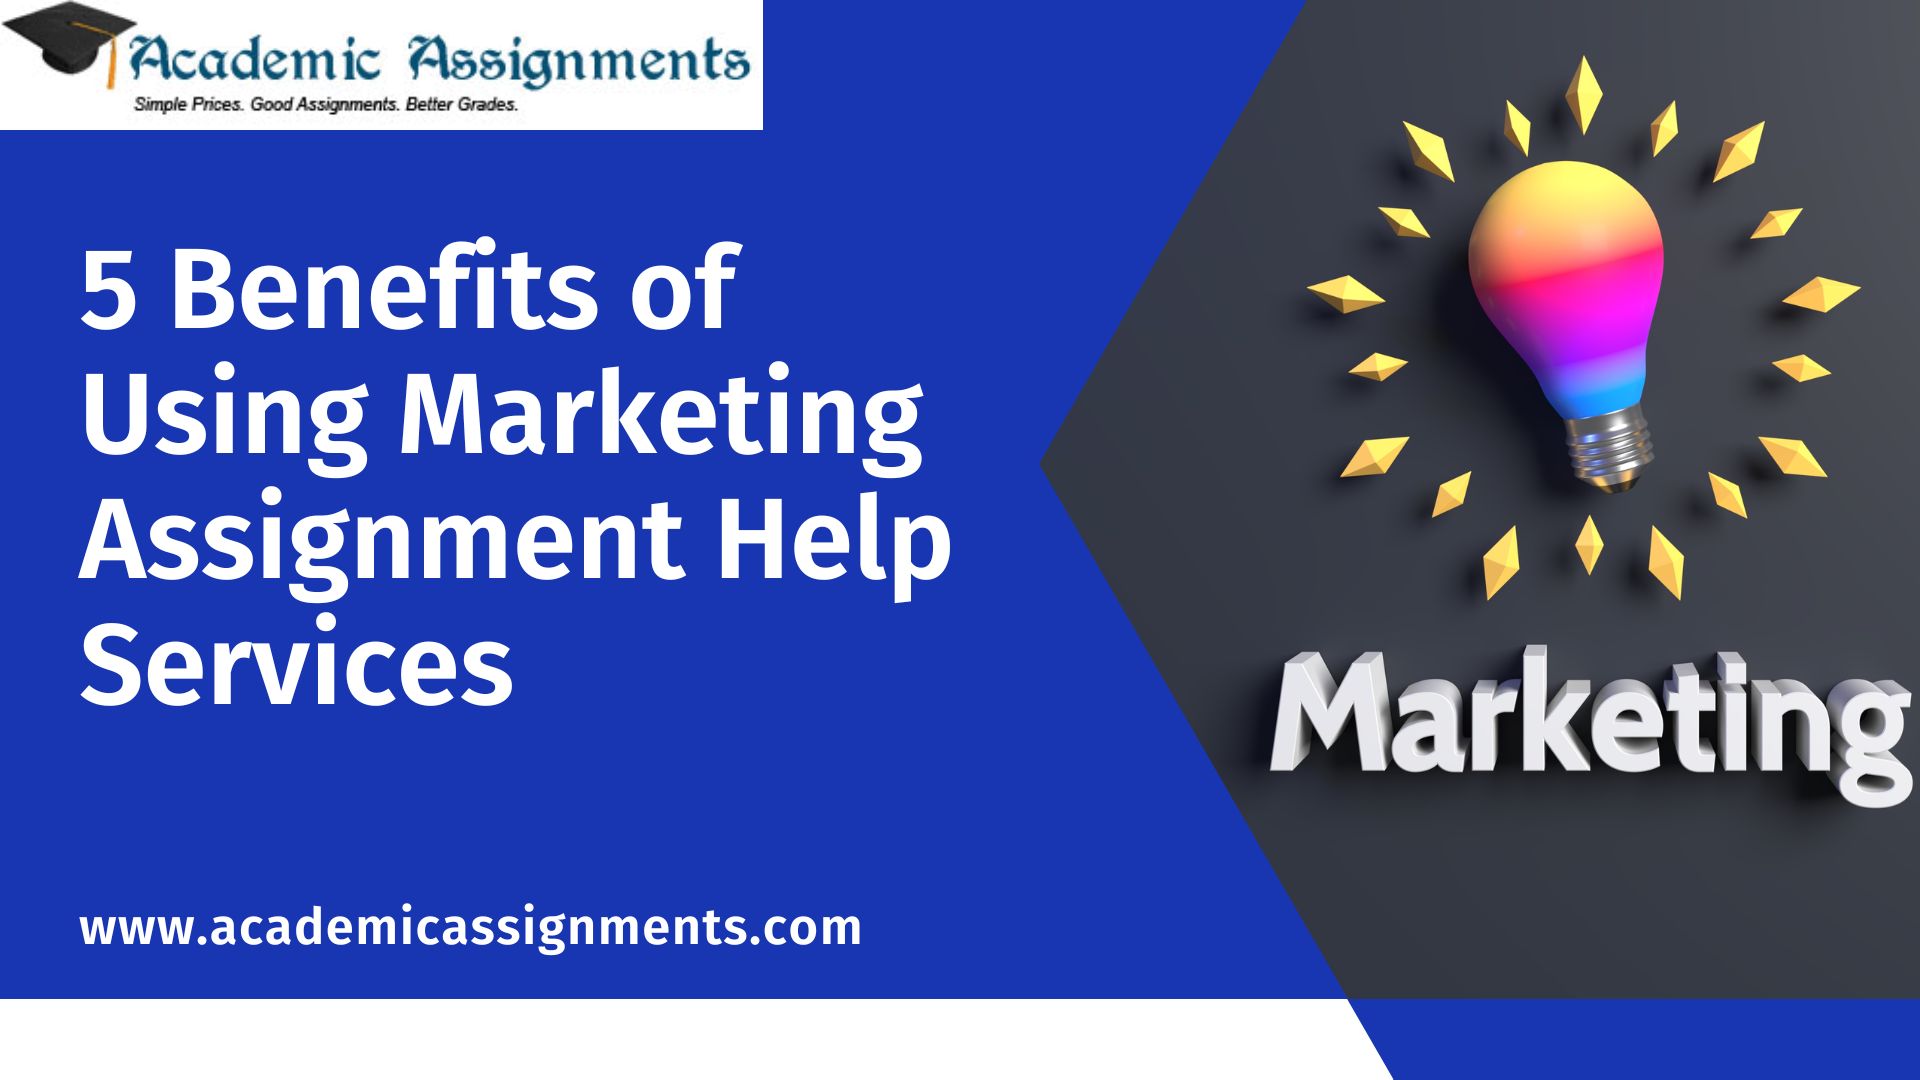 5 Benefits of Using Marketing Assignment Help Services